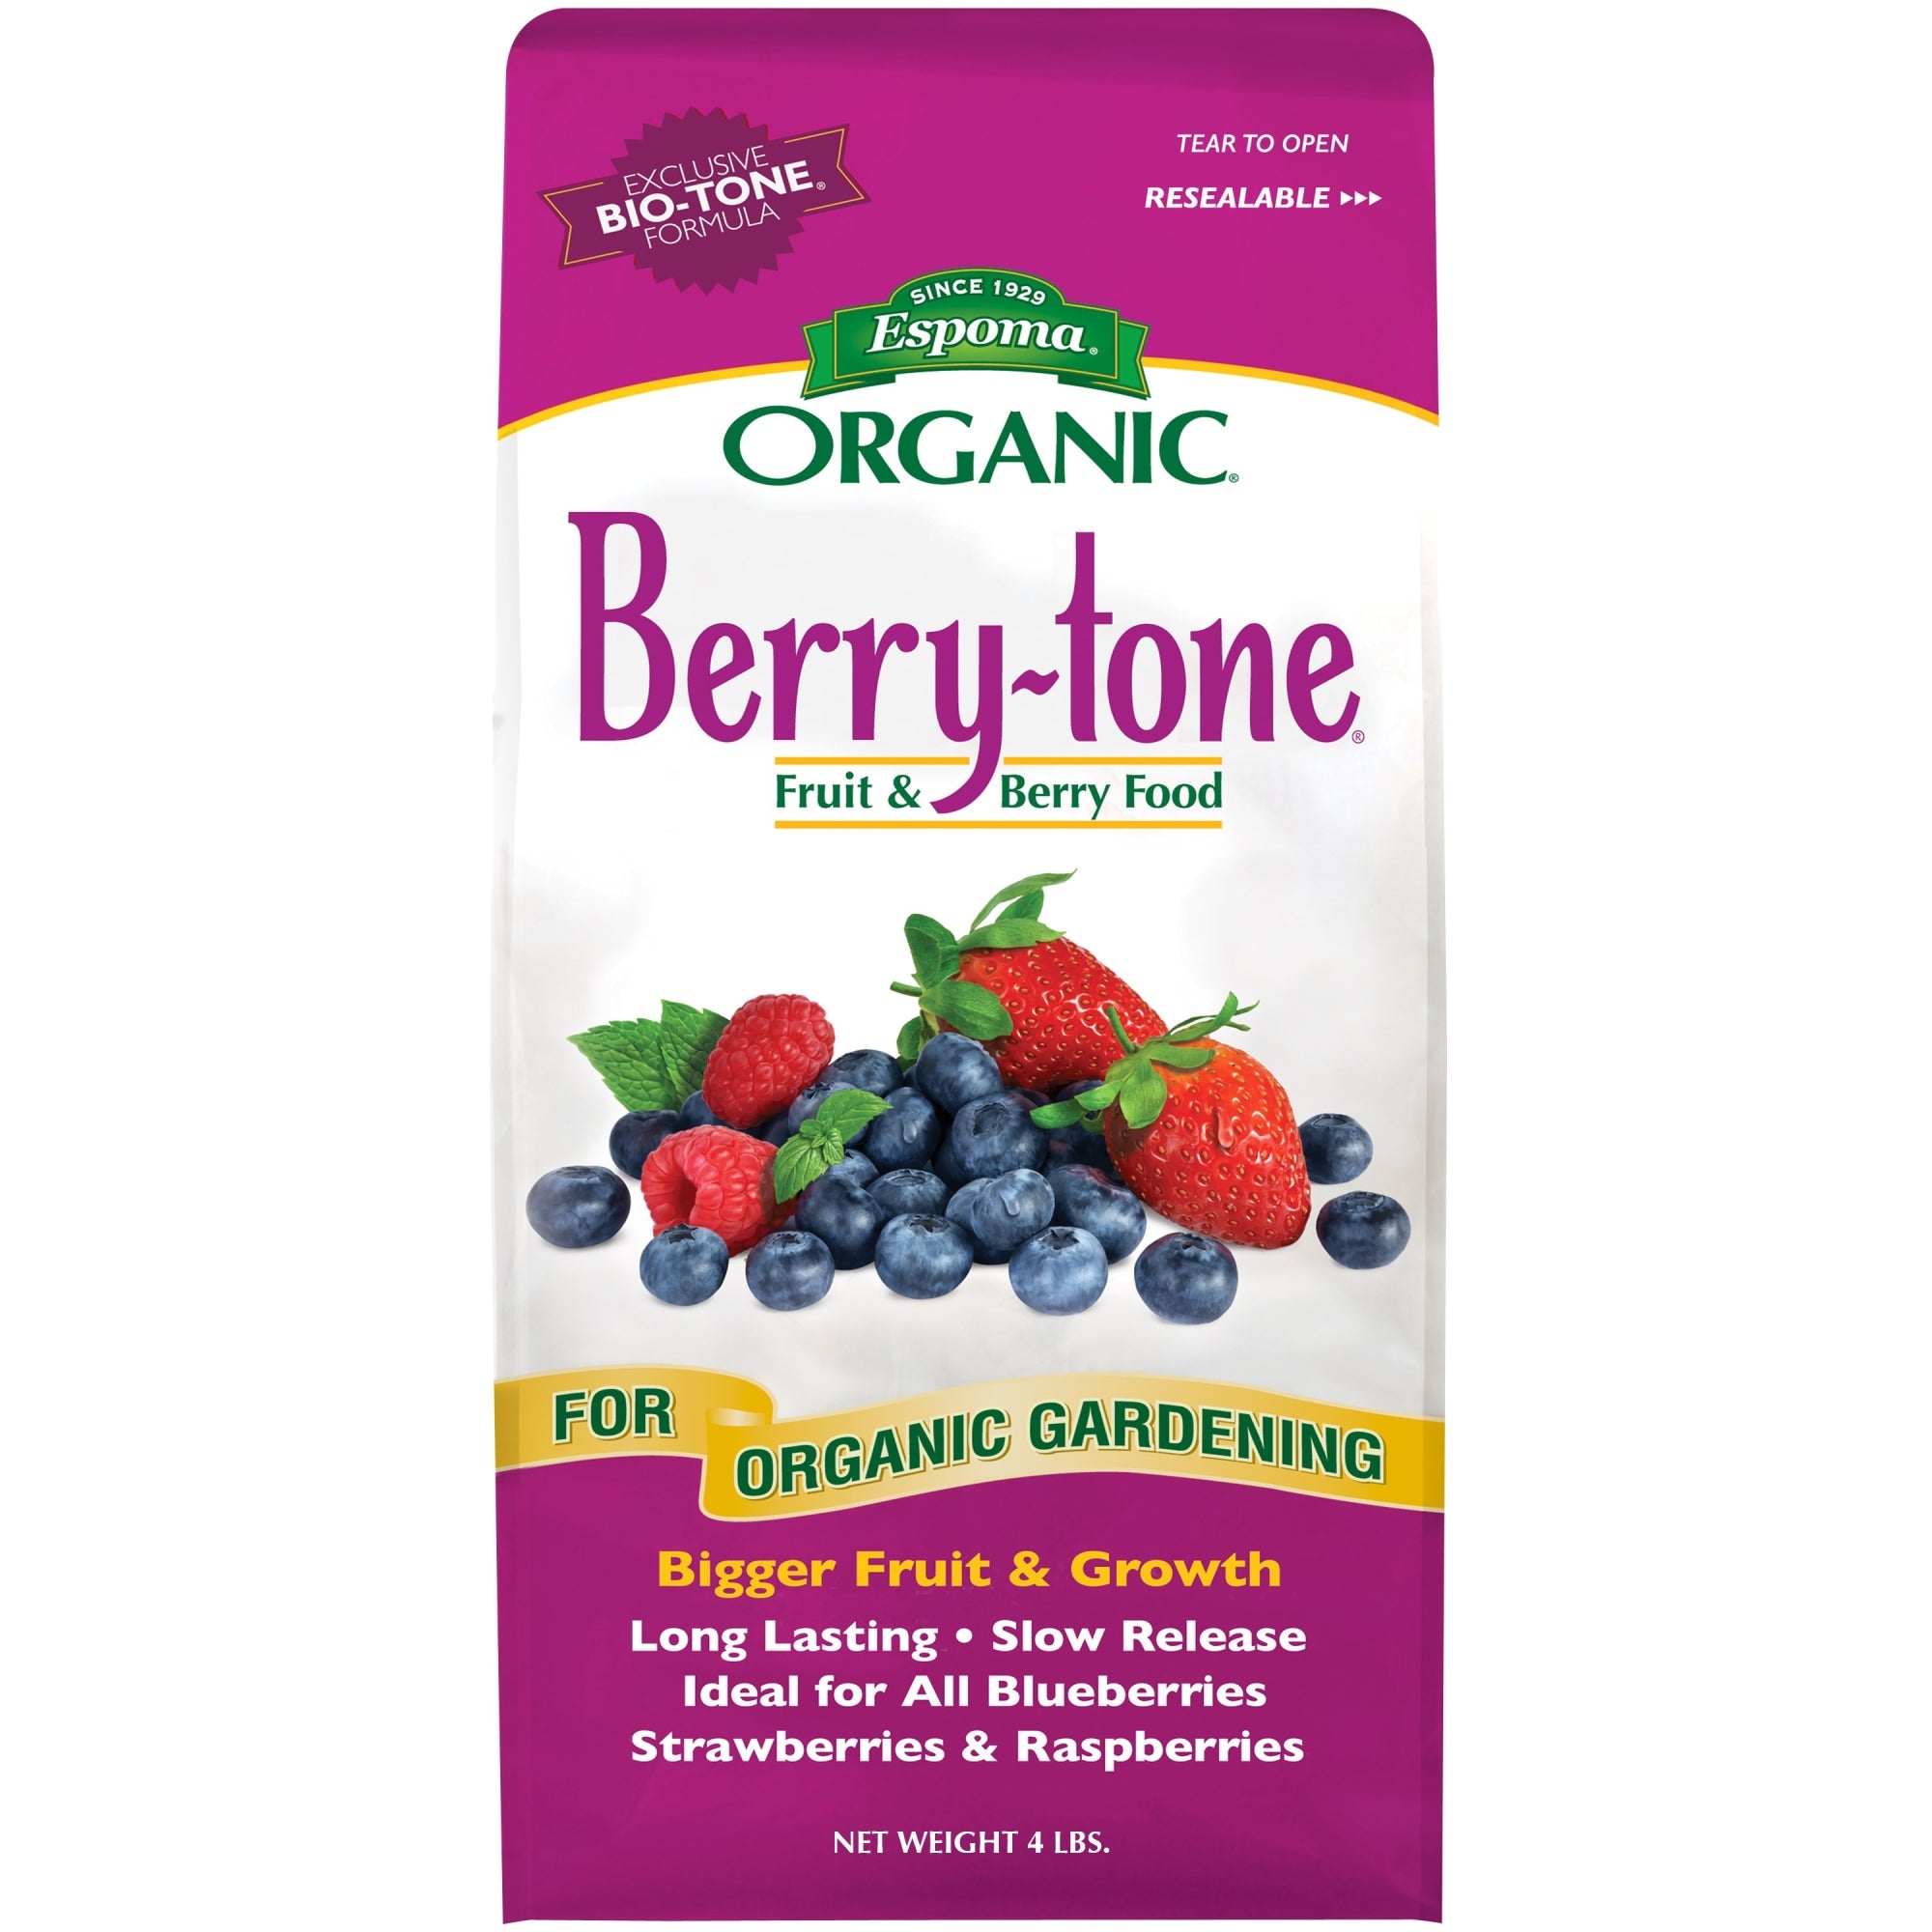 Espoma Organic Berry-tone 4-3-4 Natural & Organic Plant Food for All Berries, Use for Planting & Feeding to Promote Bountiful Harvest, 4 lb Bag